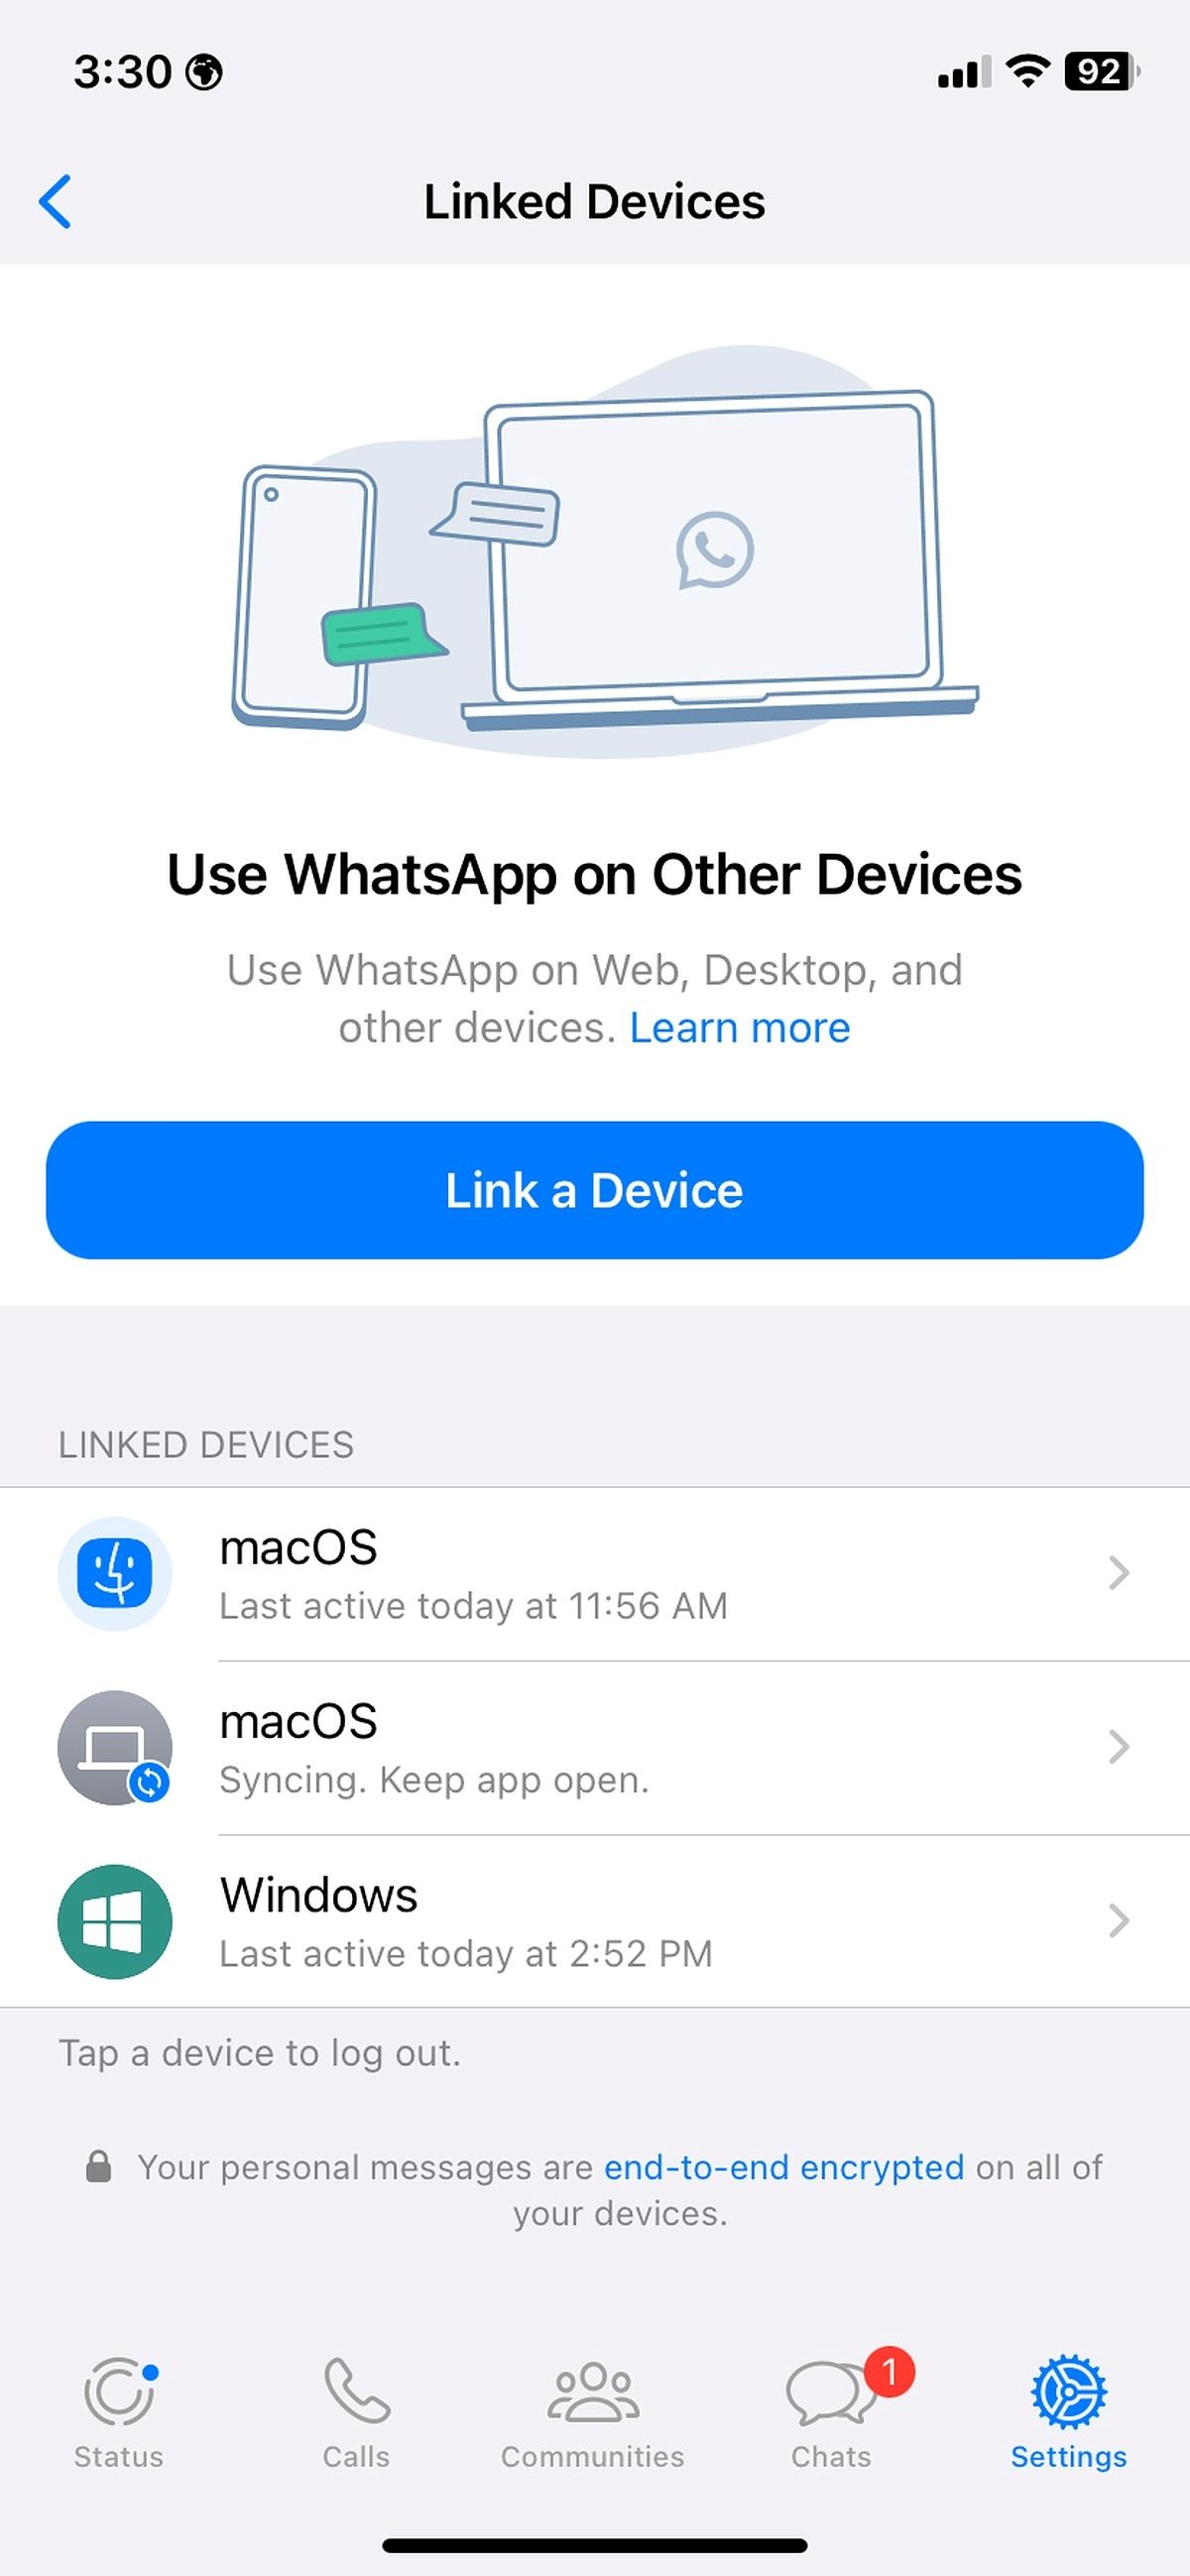 Connected devices on WhatsApp